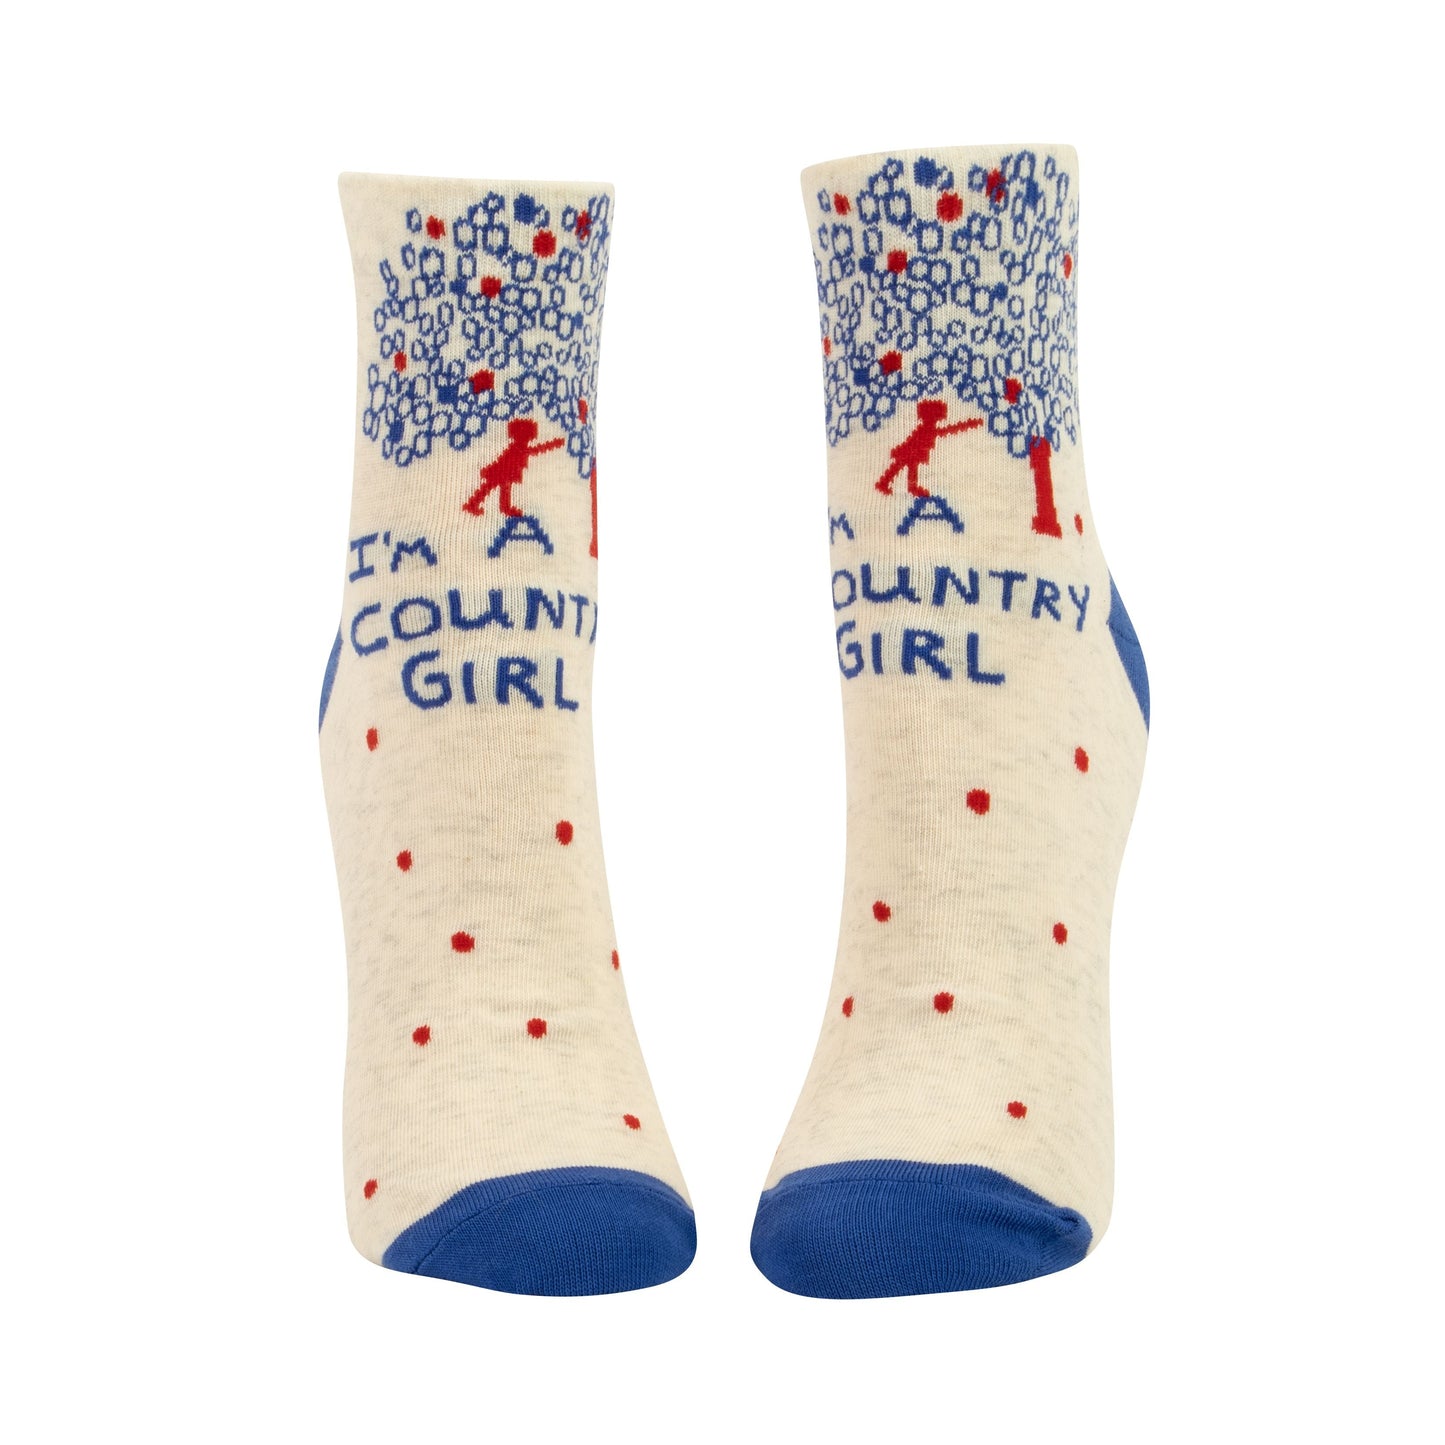 I'm A Country Girl Women's Ankle Socks